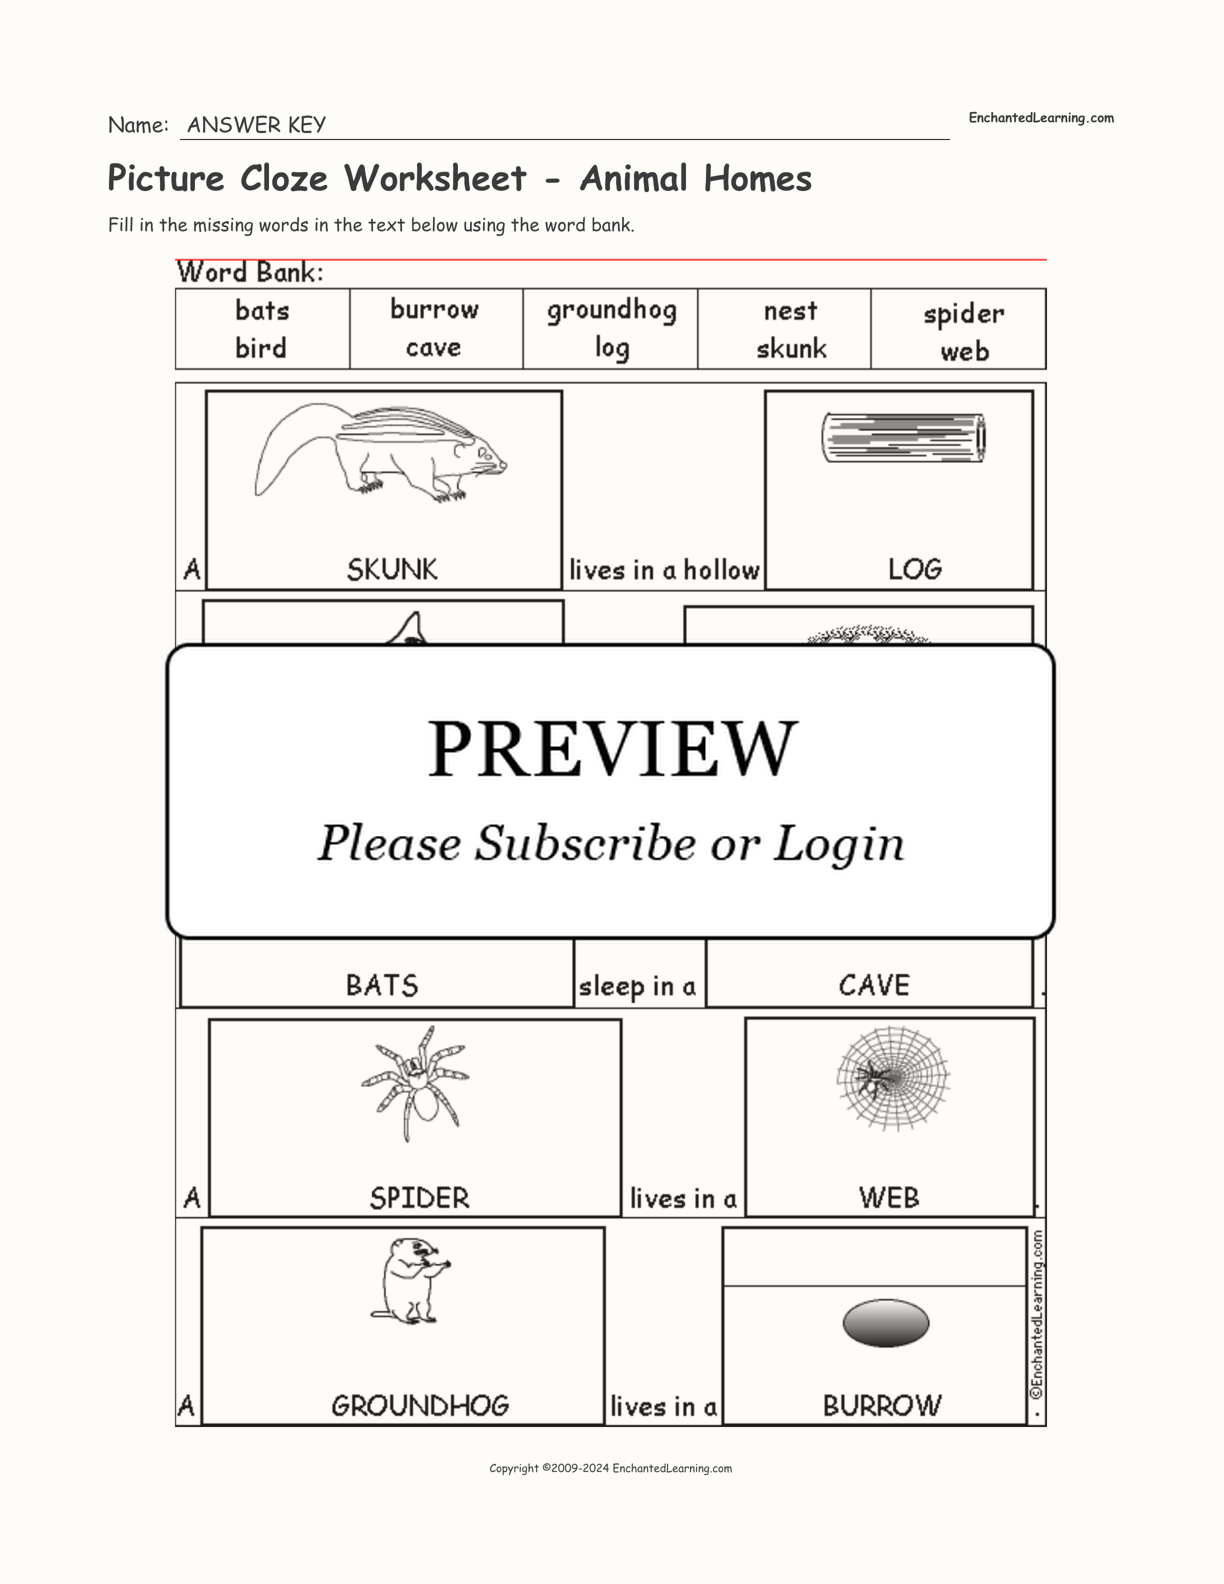 Picture Cloze Worksheet - Animal Homes interactive worksheet page 2